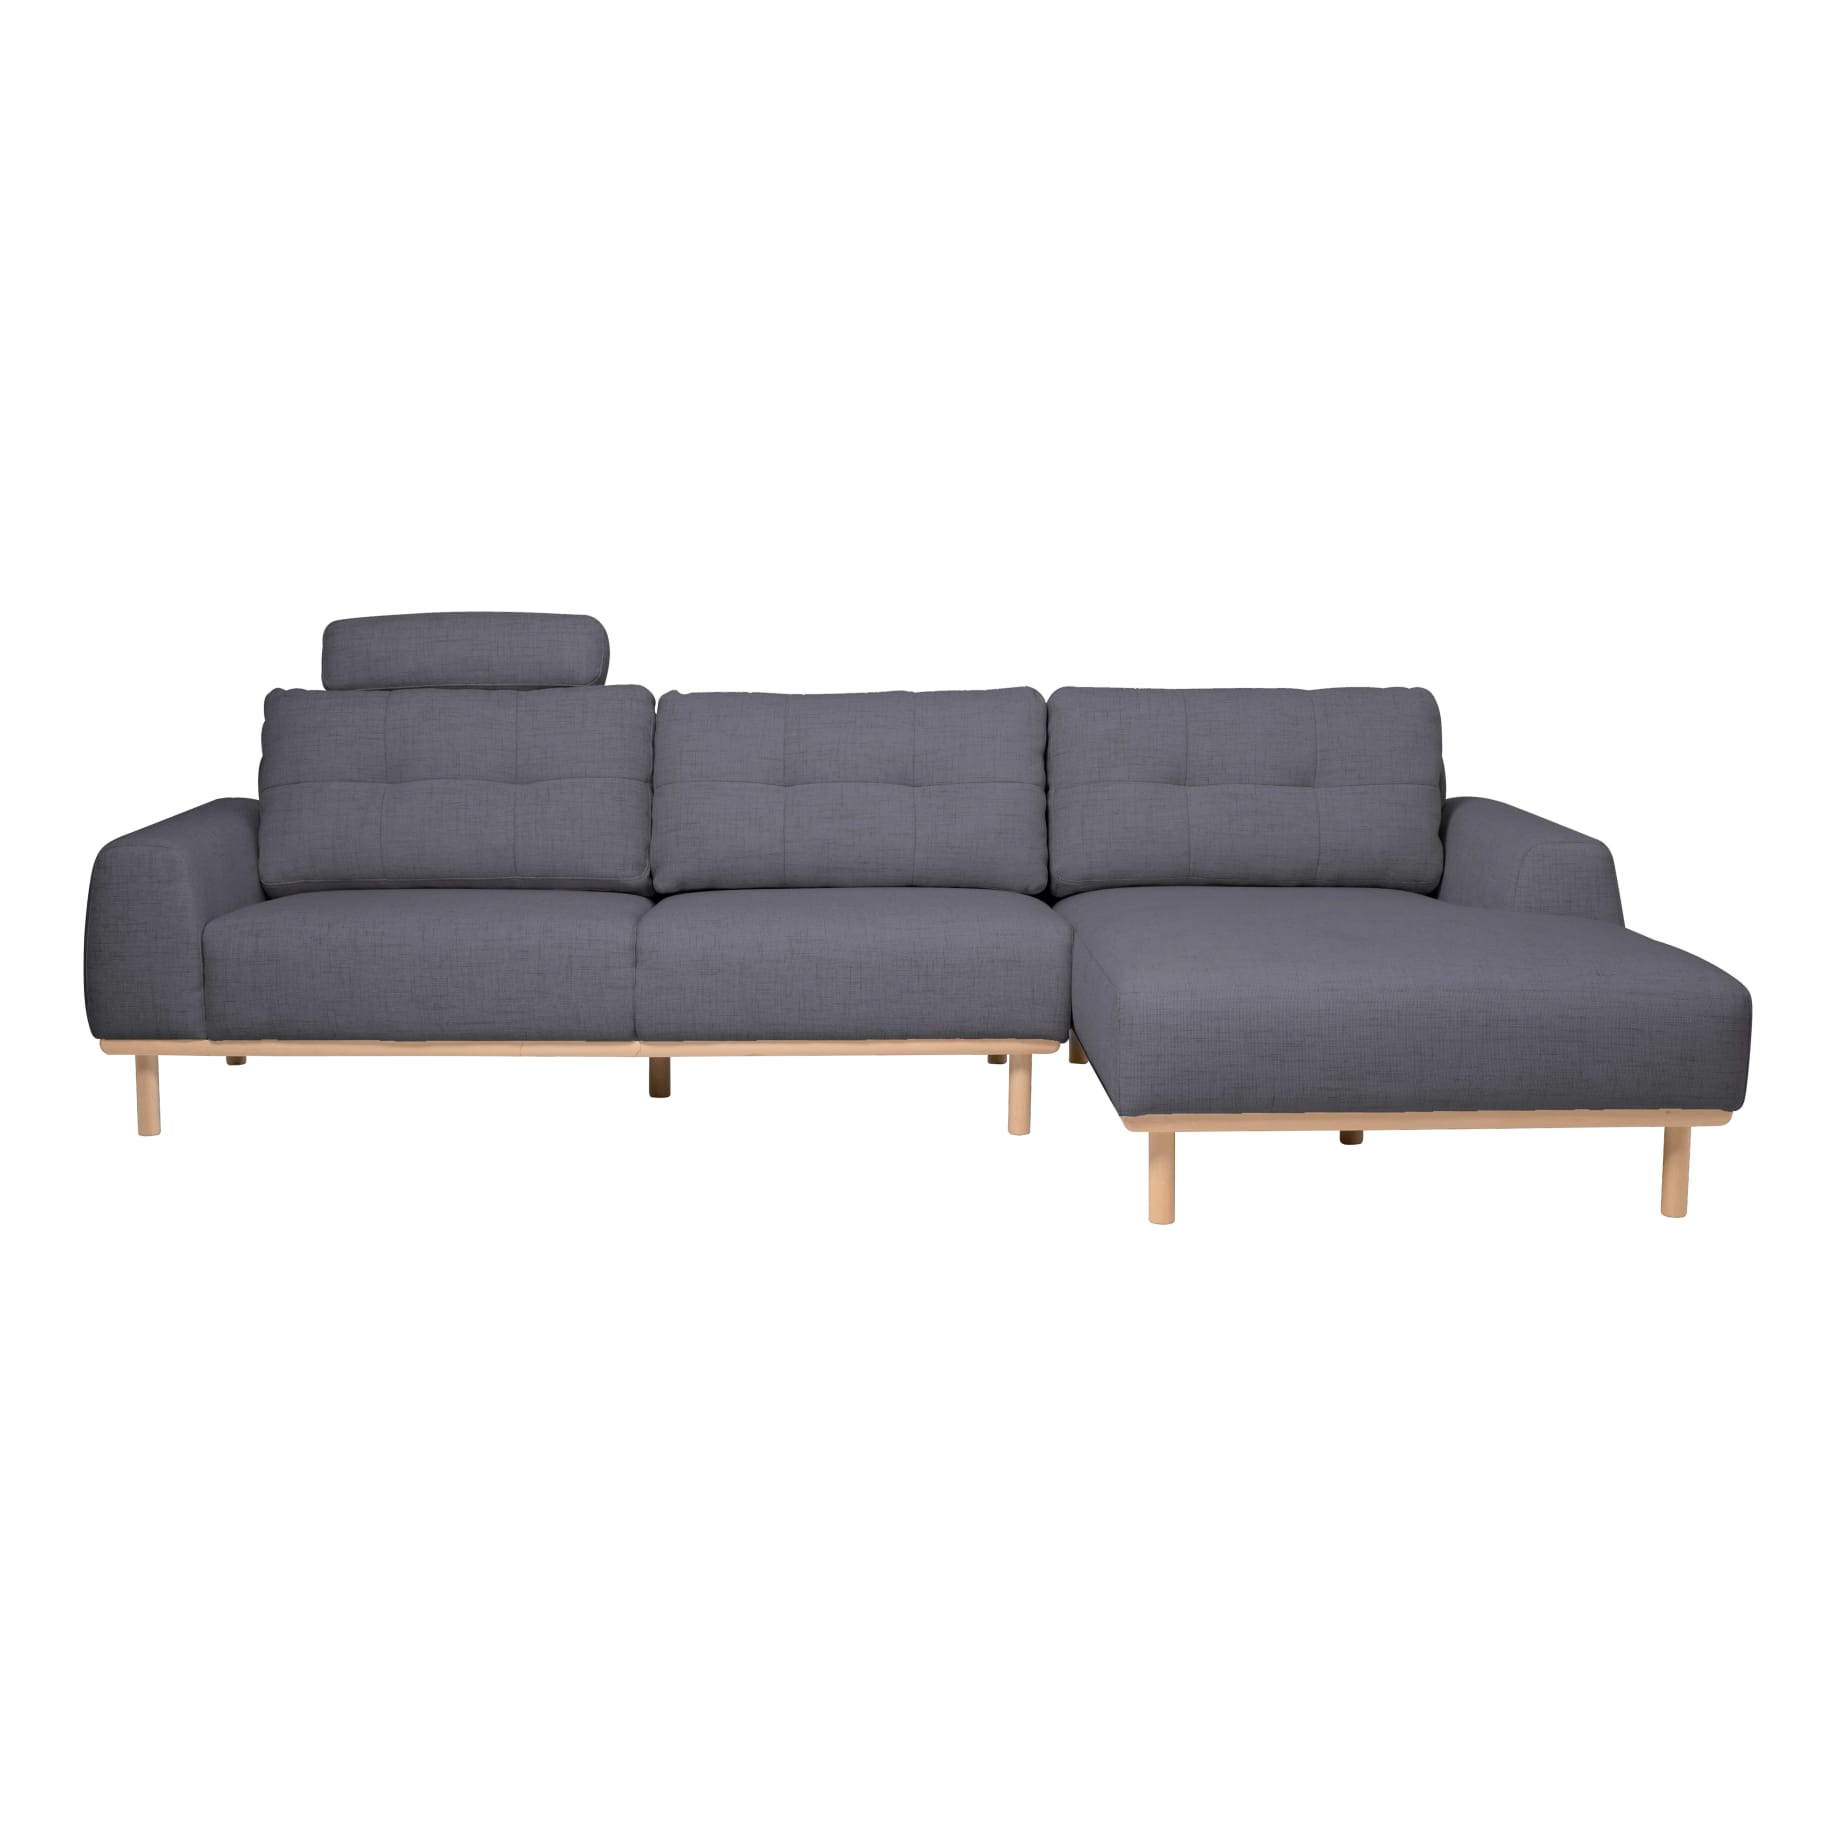 Stratton 3 Seater+Chaise RHF in Cloud Storm